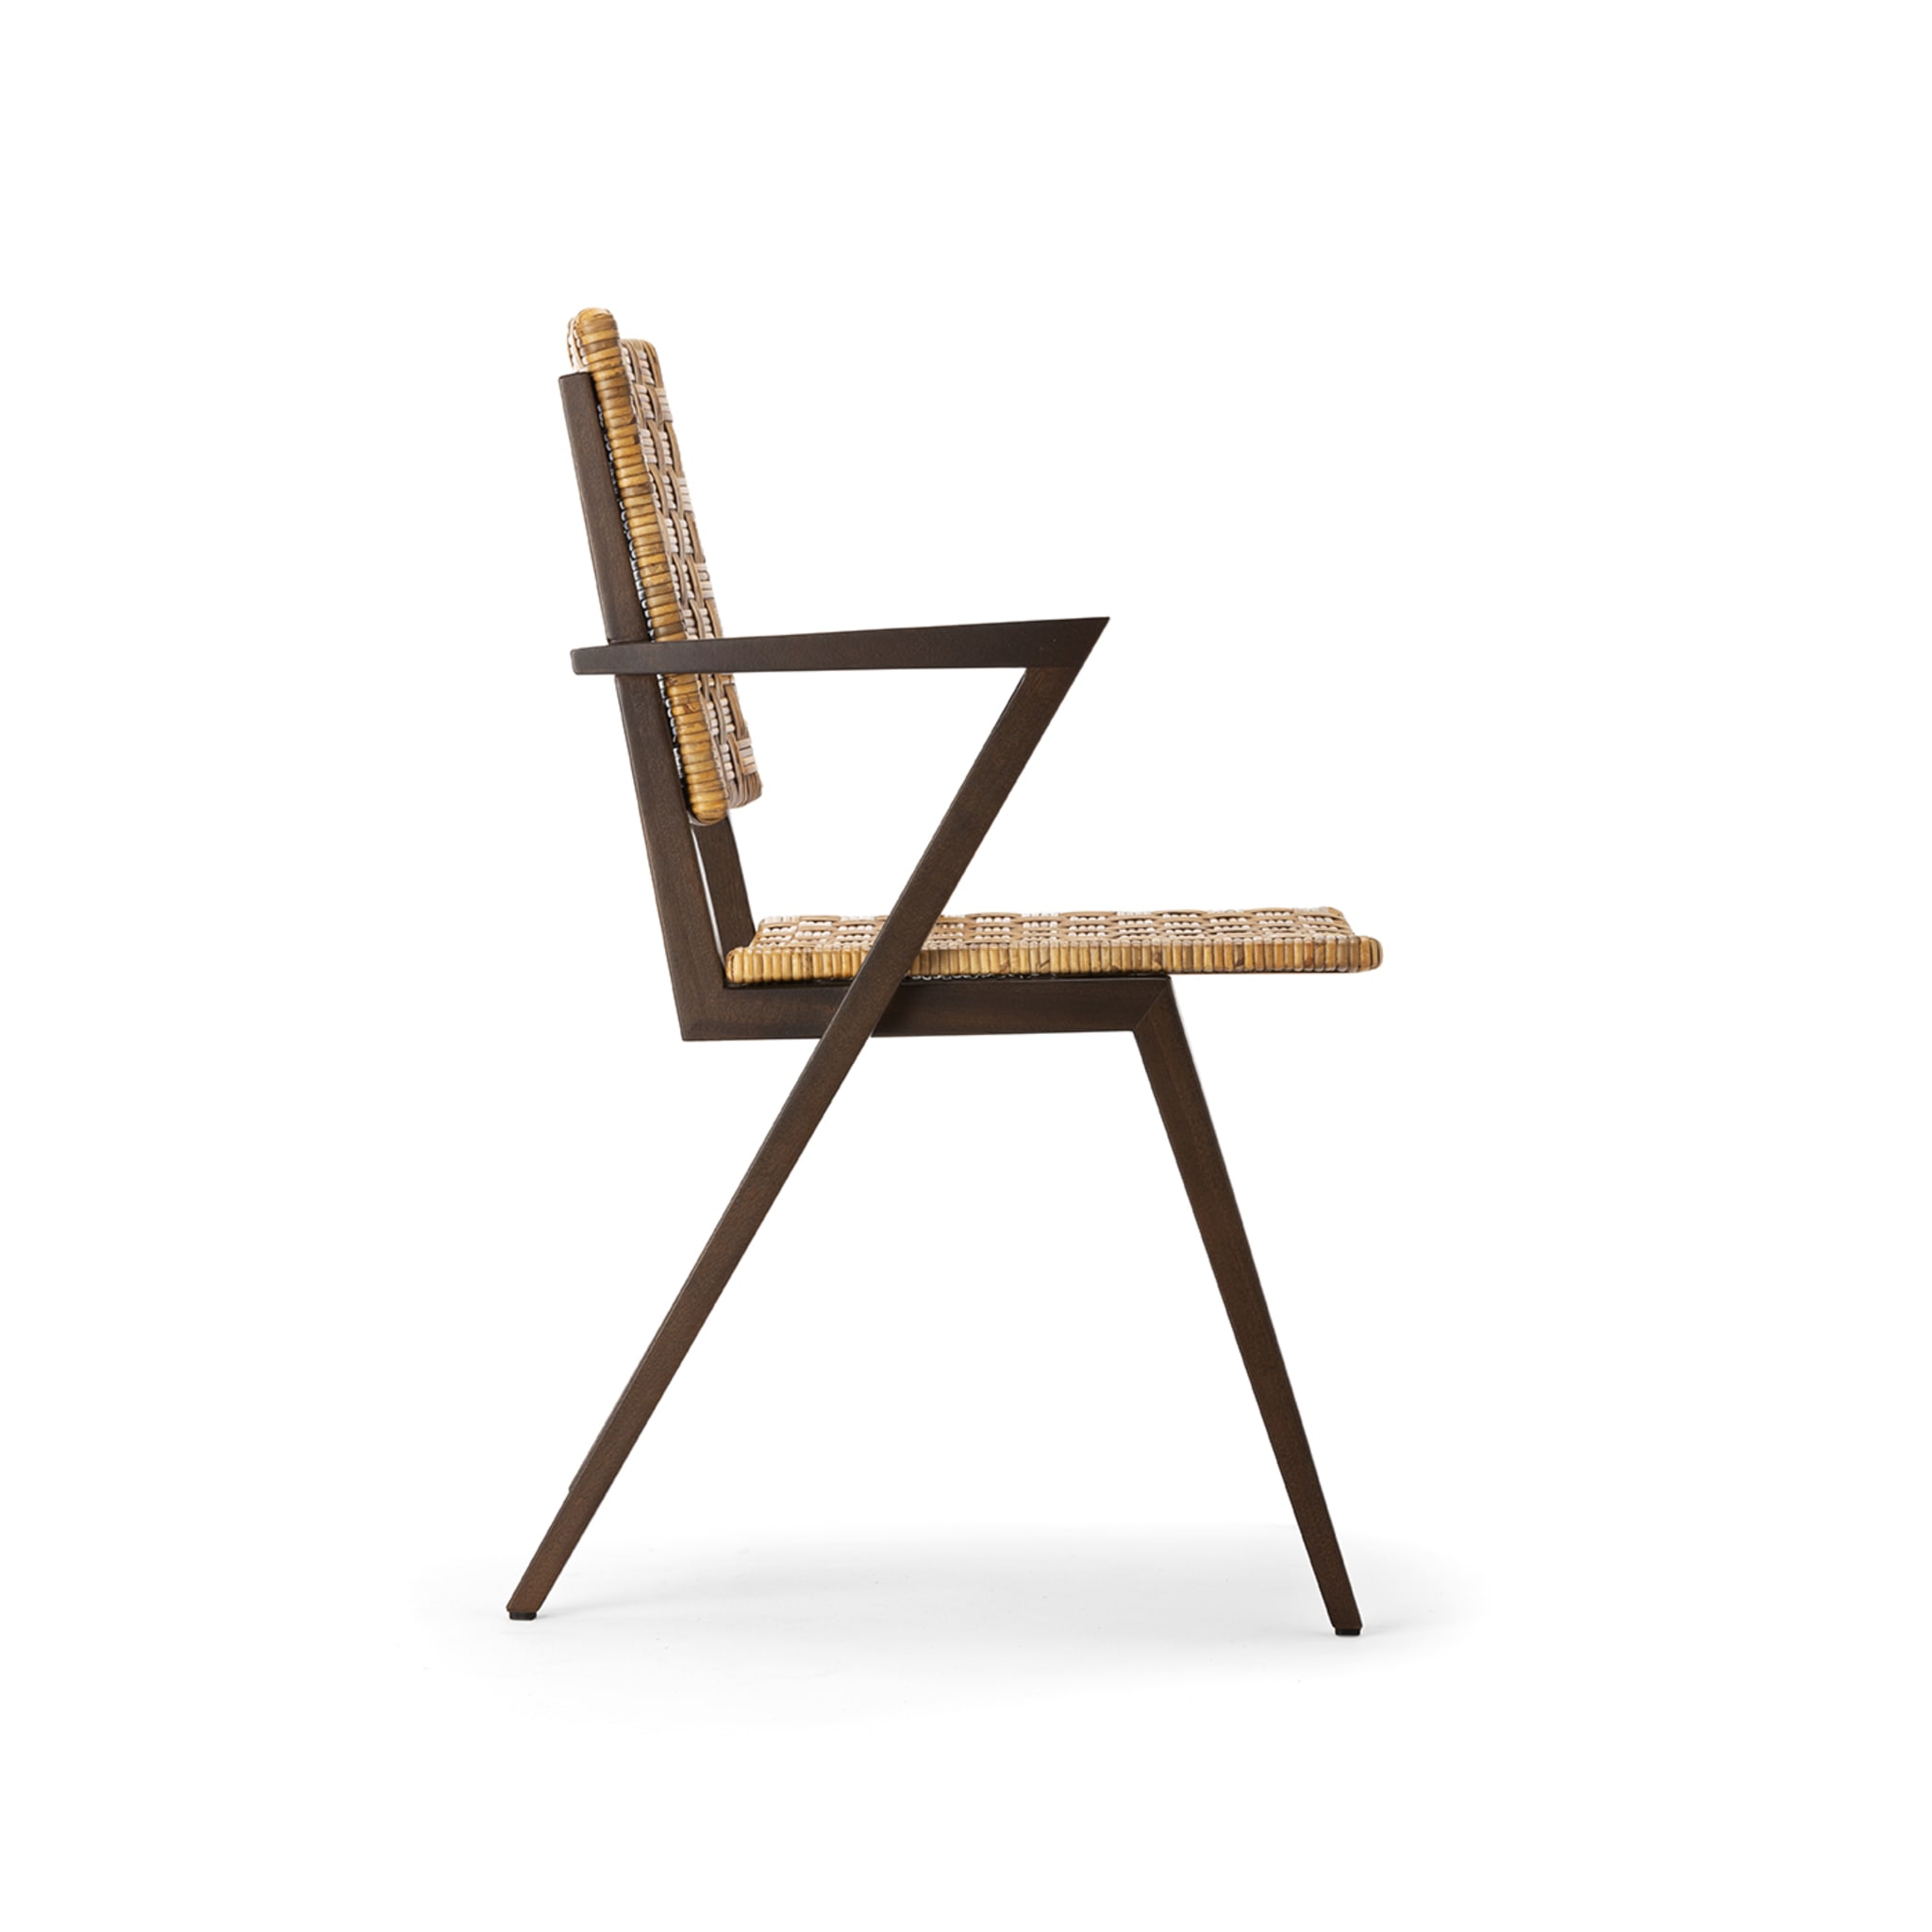 Lupo 1945 Chair by Franco Albini - Alternative view 2